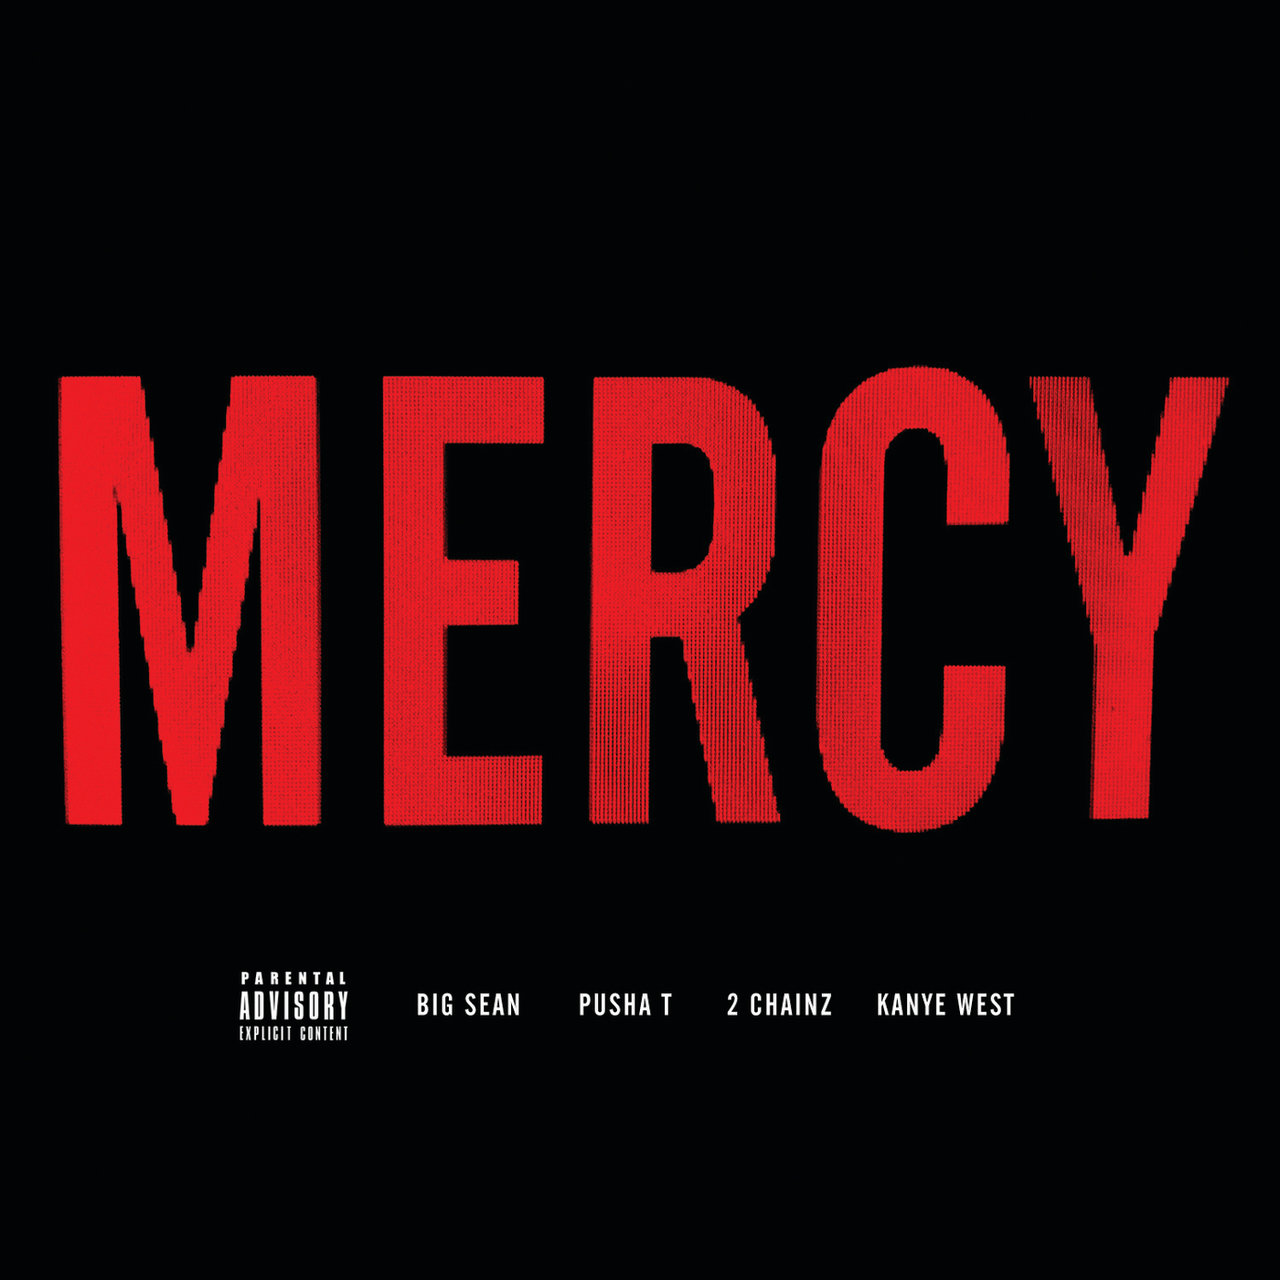 Kanye West, Big Sean, Pusha T and 2 Chainz - Mercy (Cover)